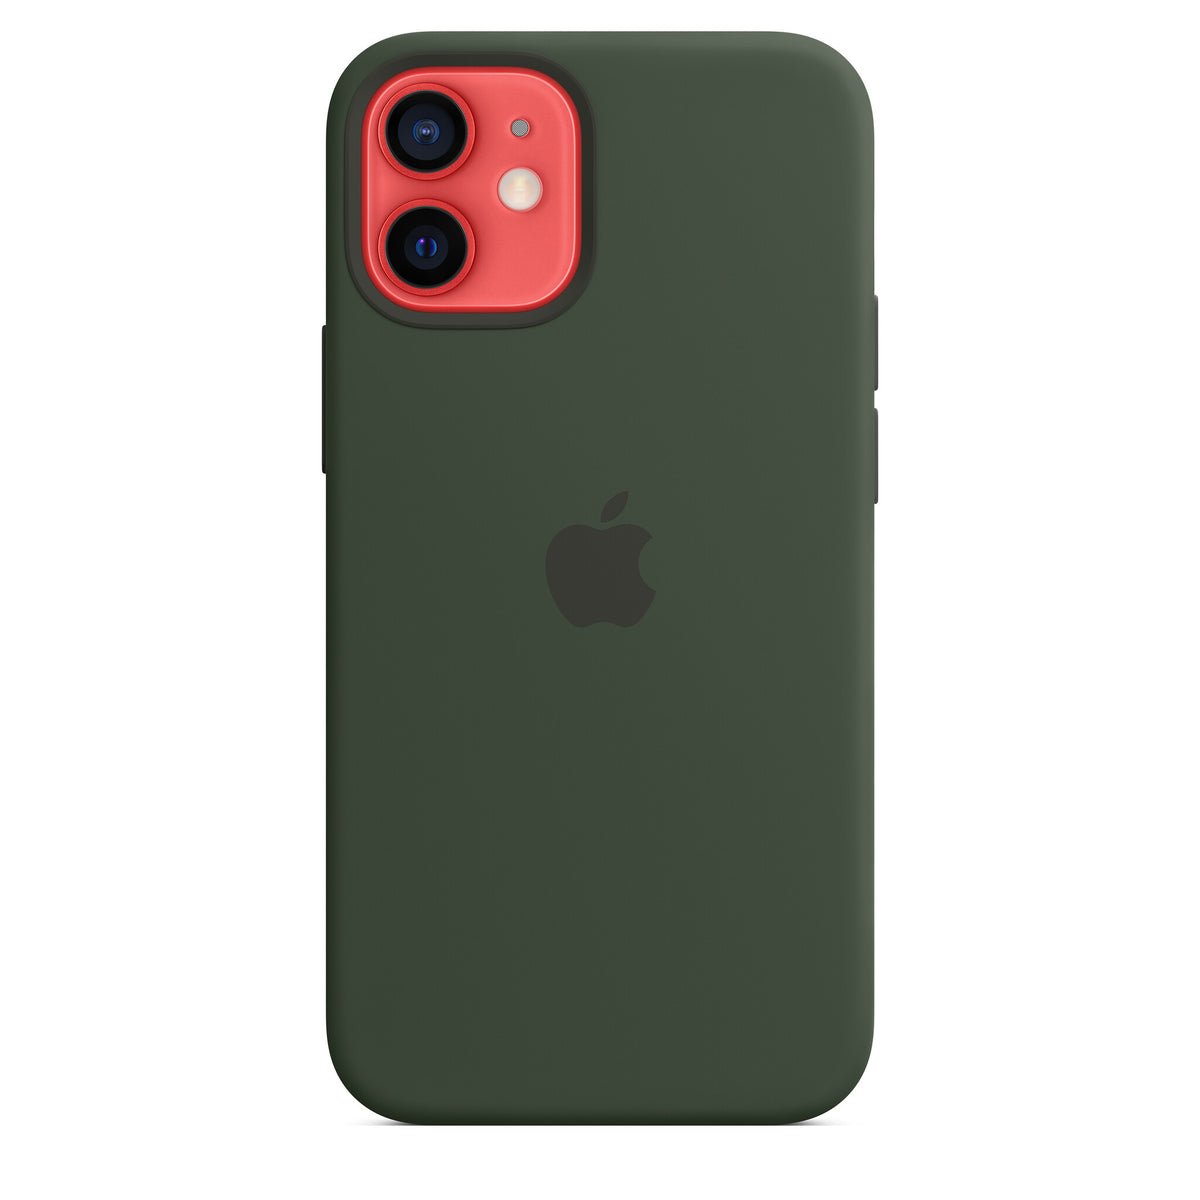 Apple iPhone 12 mini Silicone Case with MagSafe in Cypress Green